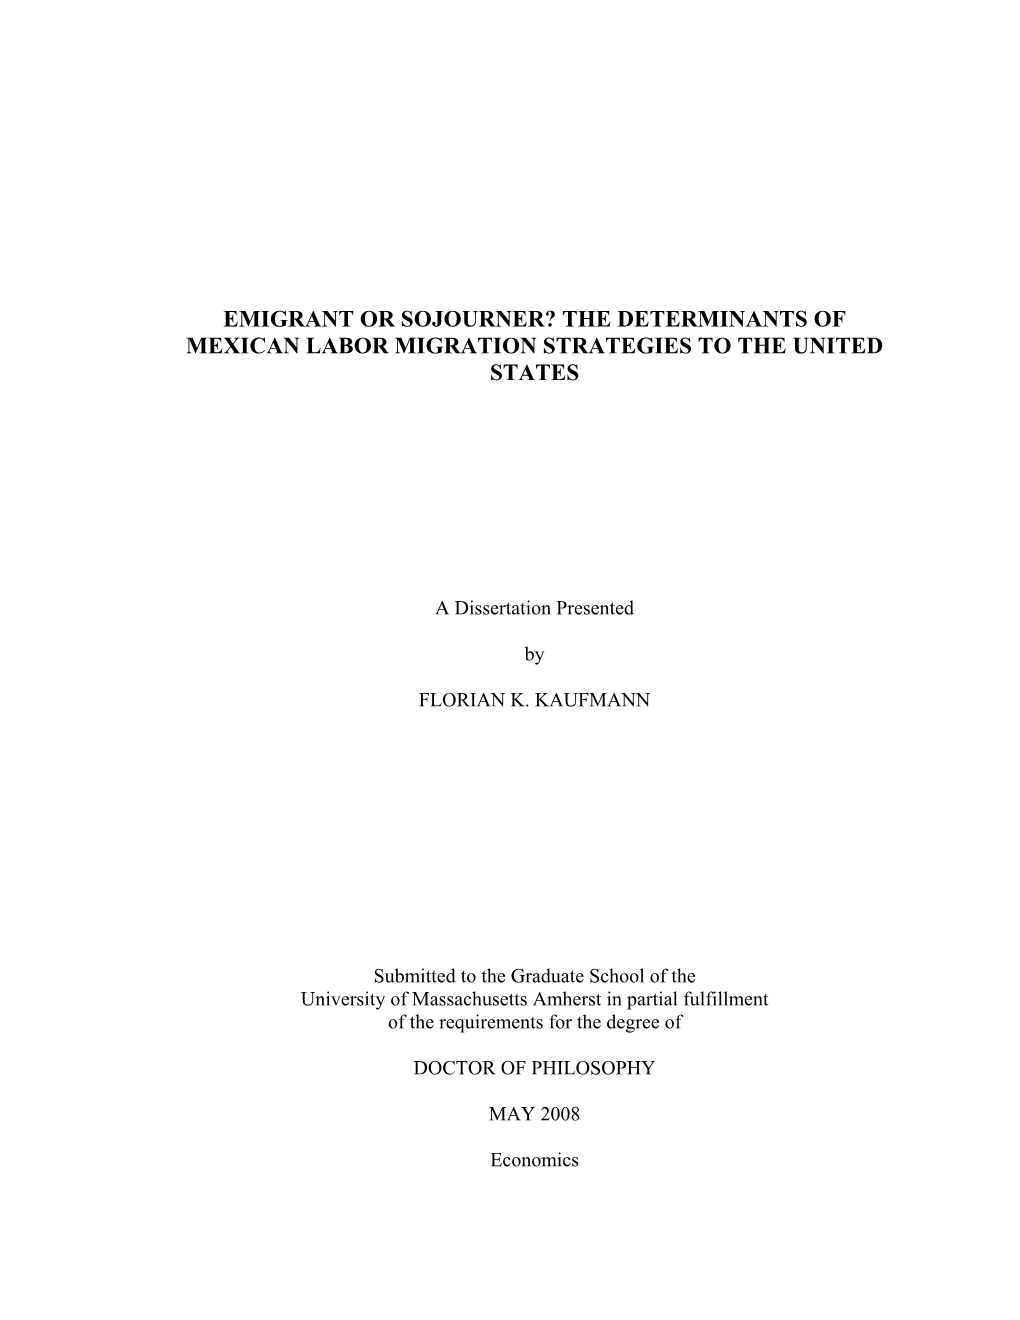 The Determinants of Mexican Labor Migration Strategies to the United States